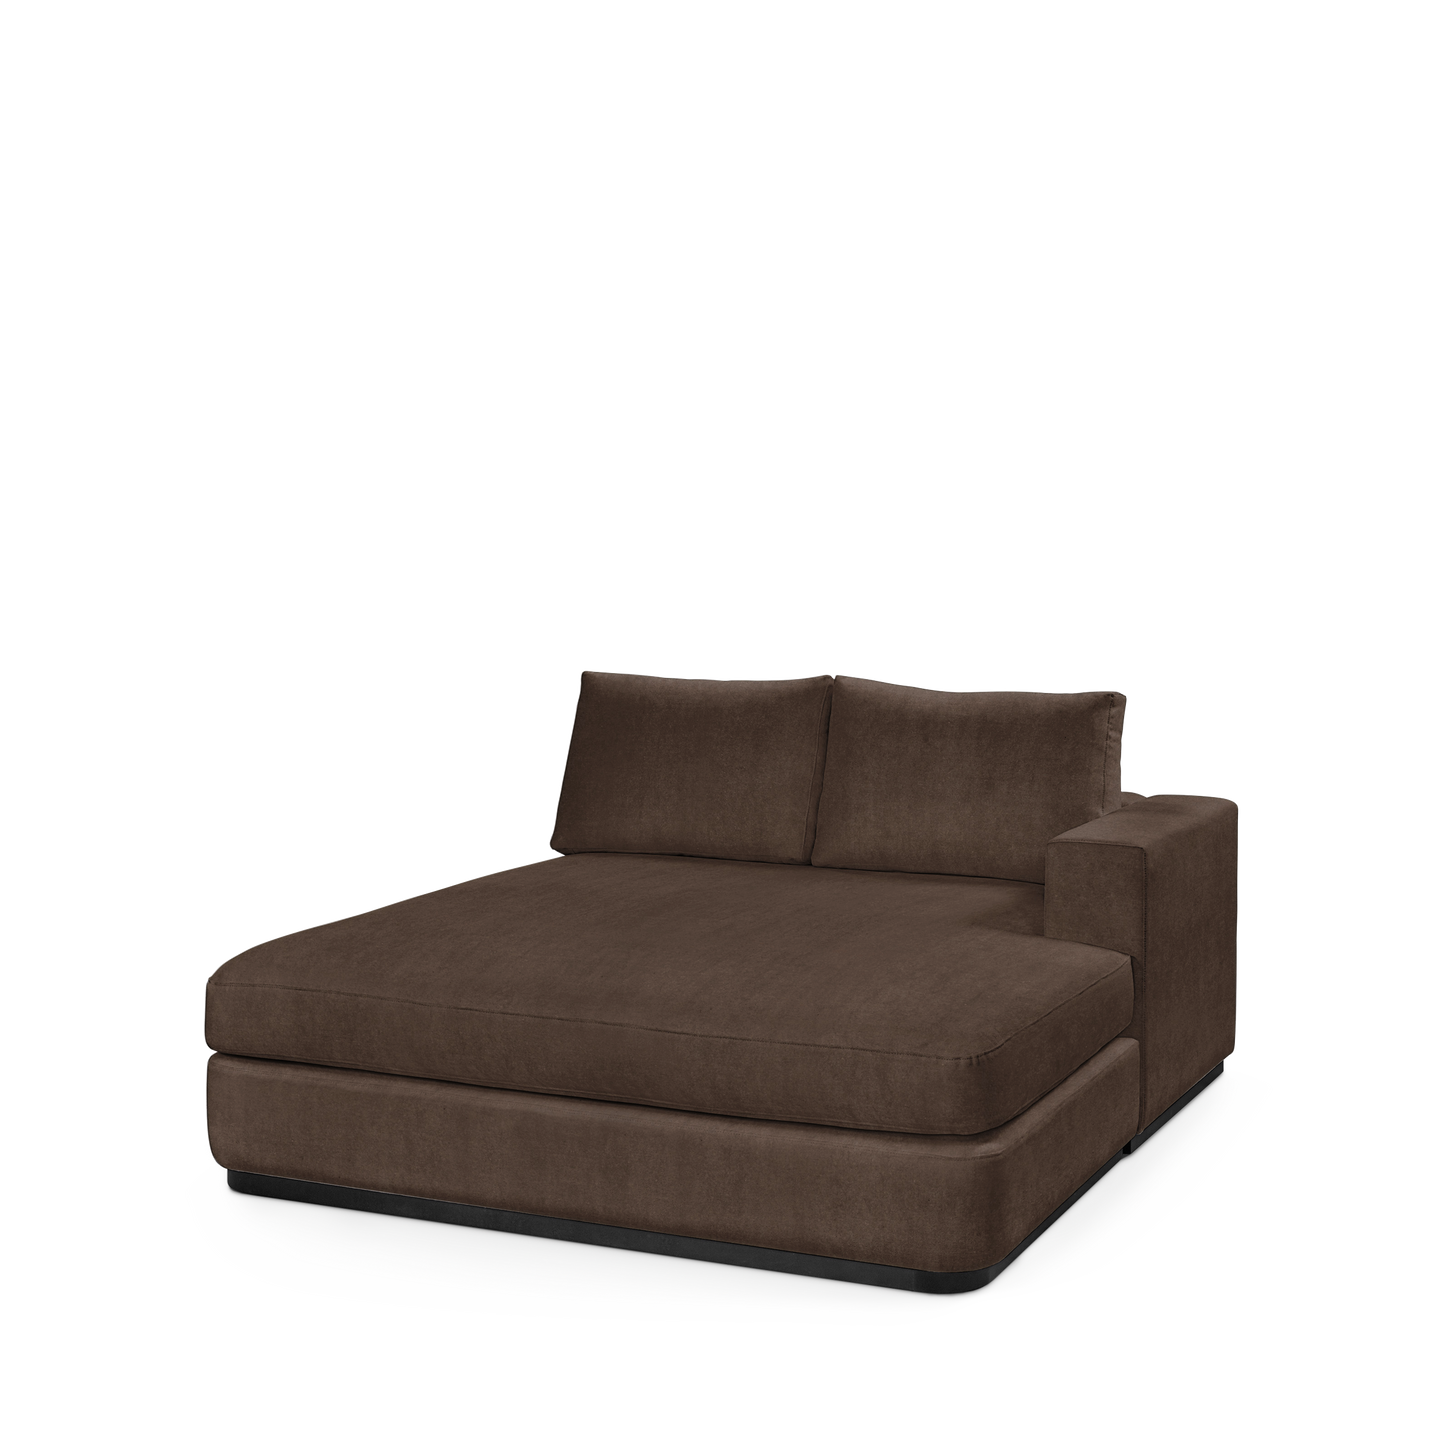 ATLAS 160 Lounge Bed arm rest right with suede brown textile